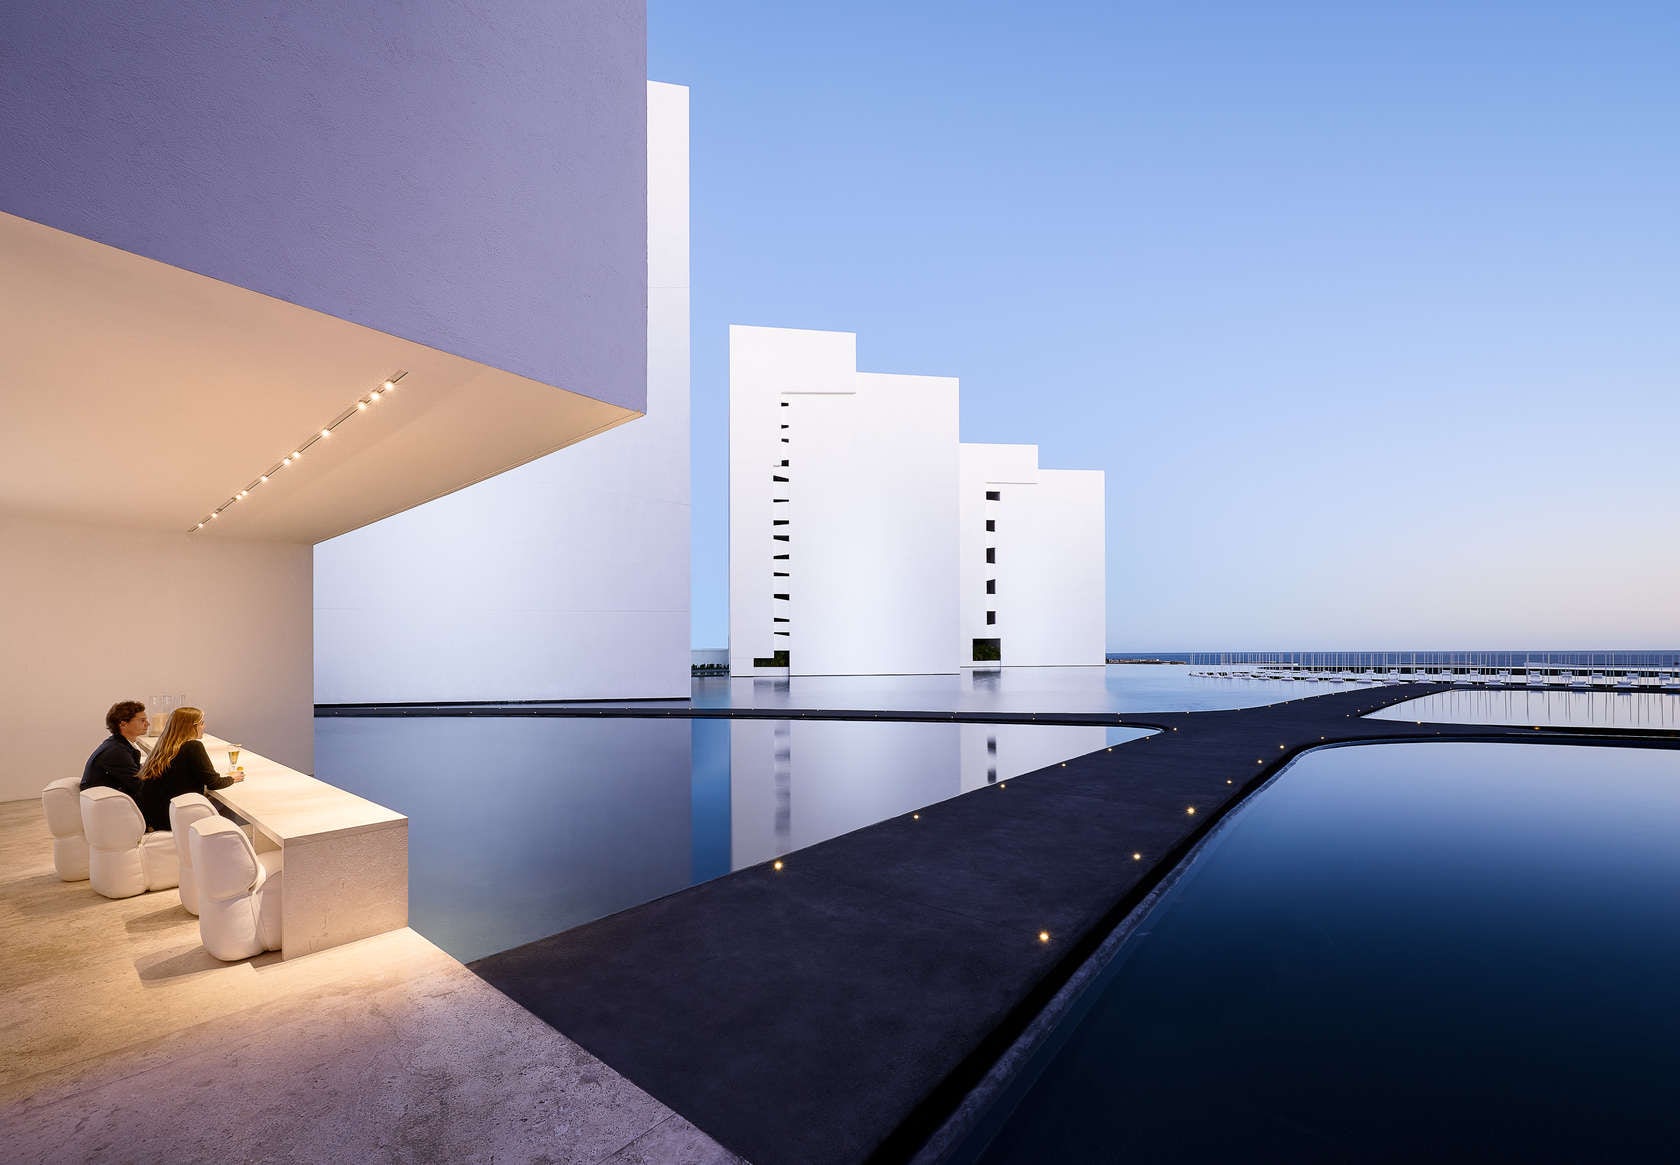 Evoking Icons: Mar Adentro Echoes the Brilliance of Louis Kahn's